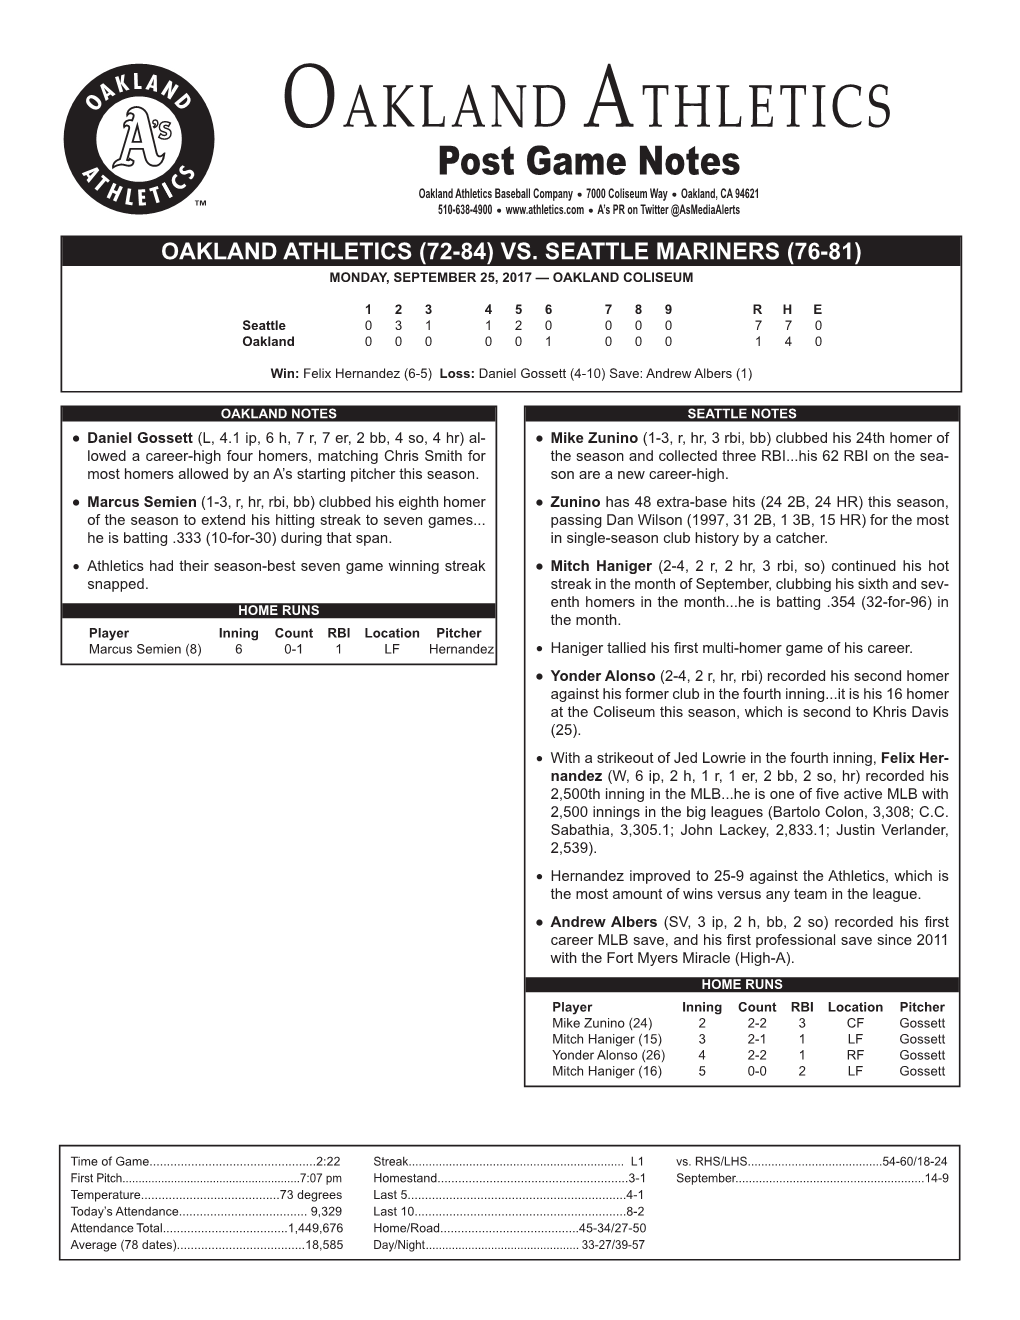 09-25-2017 A's Post Game Notes